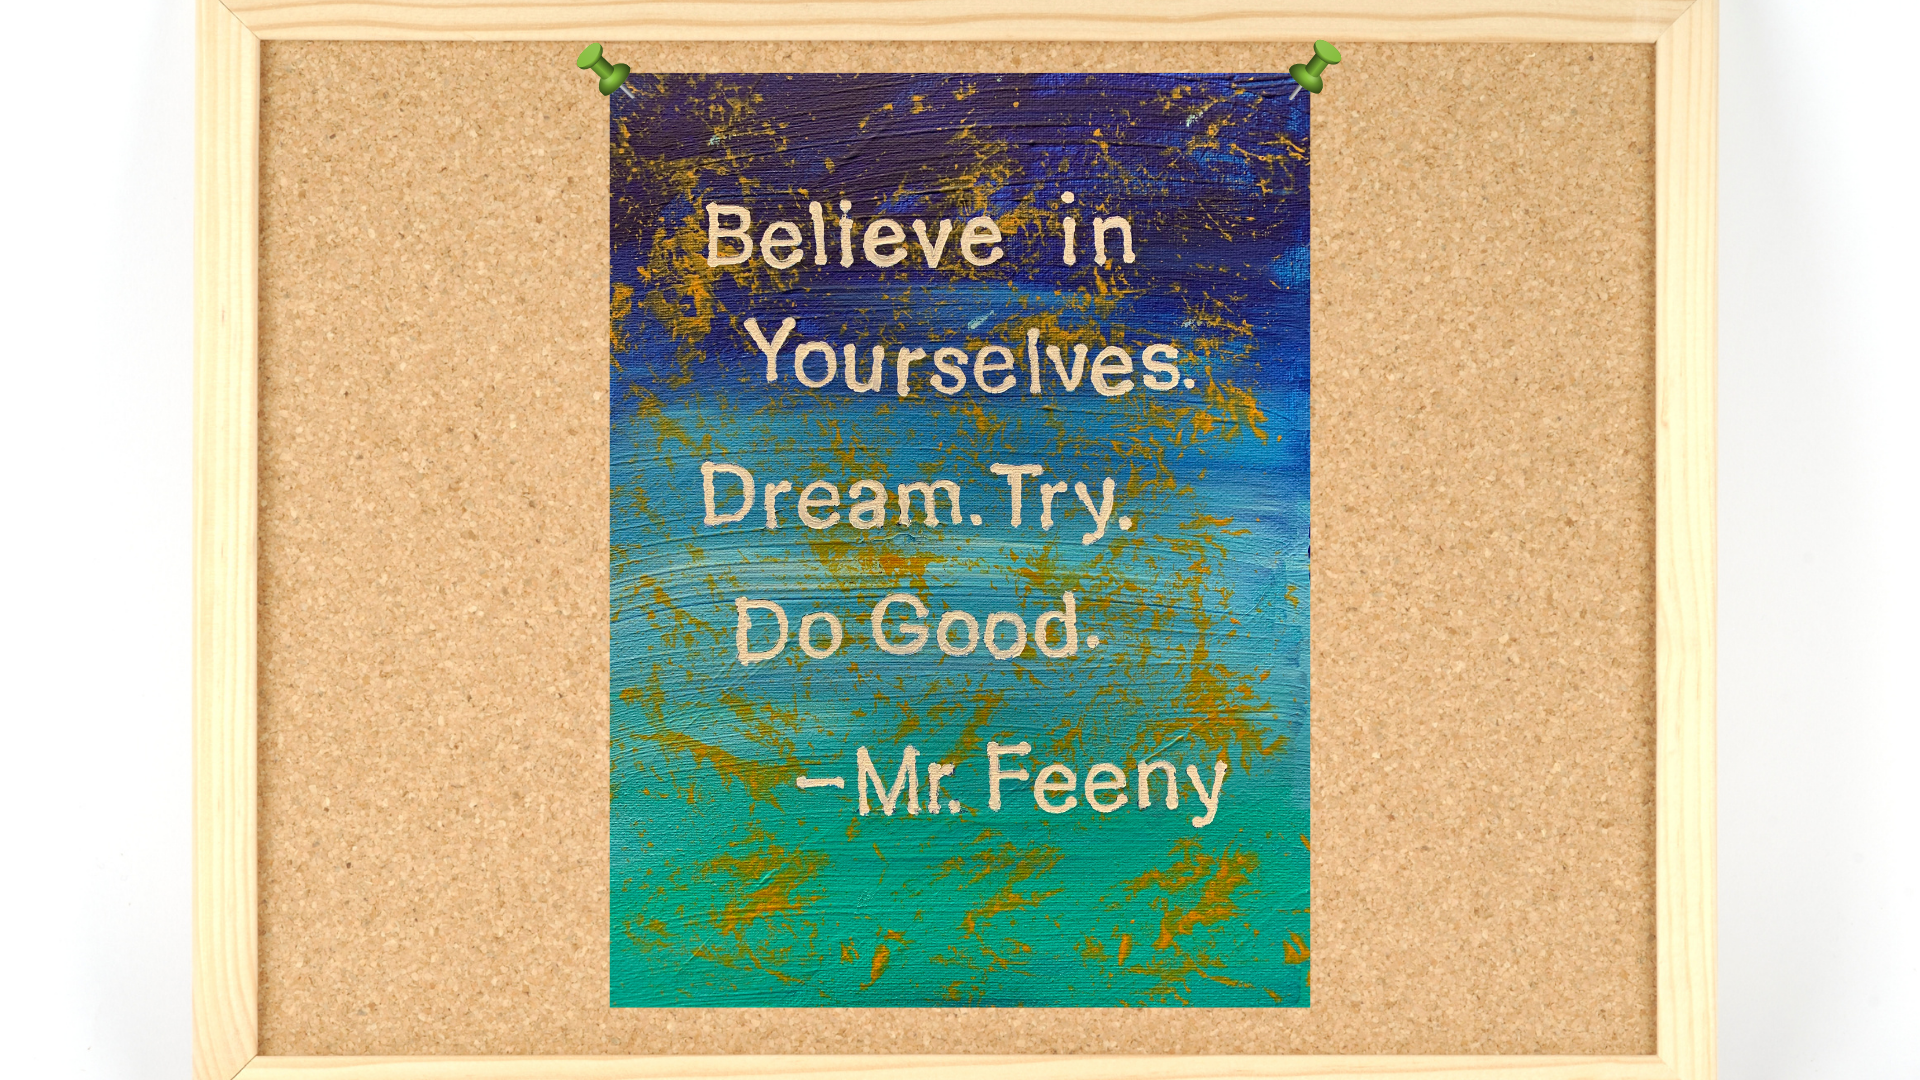 an image of a bulletin board with art pinned to it.  The art is an example of the craft shown in the video.  A blue and green abstract background, with flecks of gold.  The text reads: "Believe in yourselves. Dream. Try. Do Good.  - Mr. Feeny".